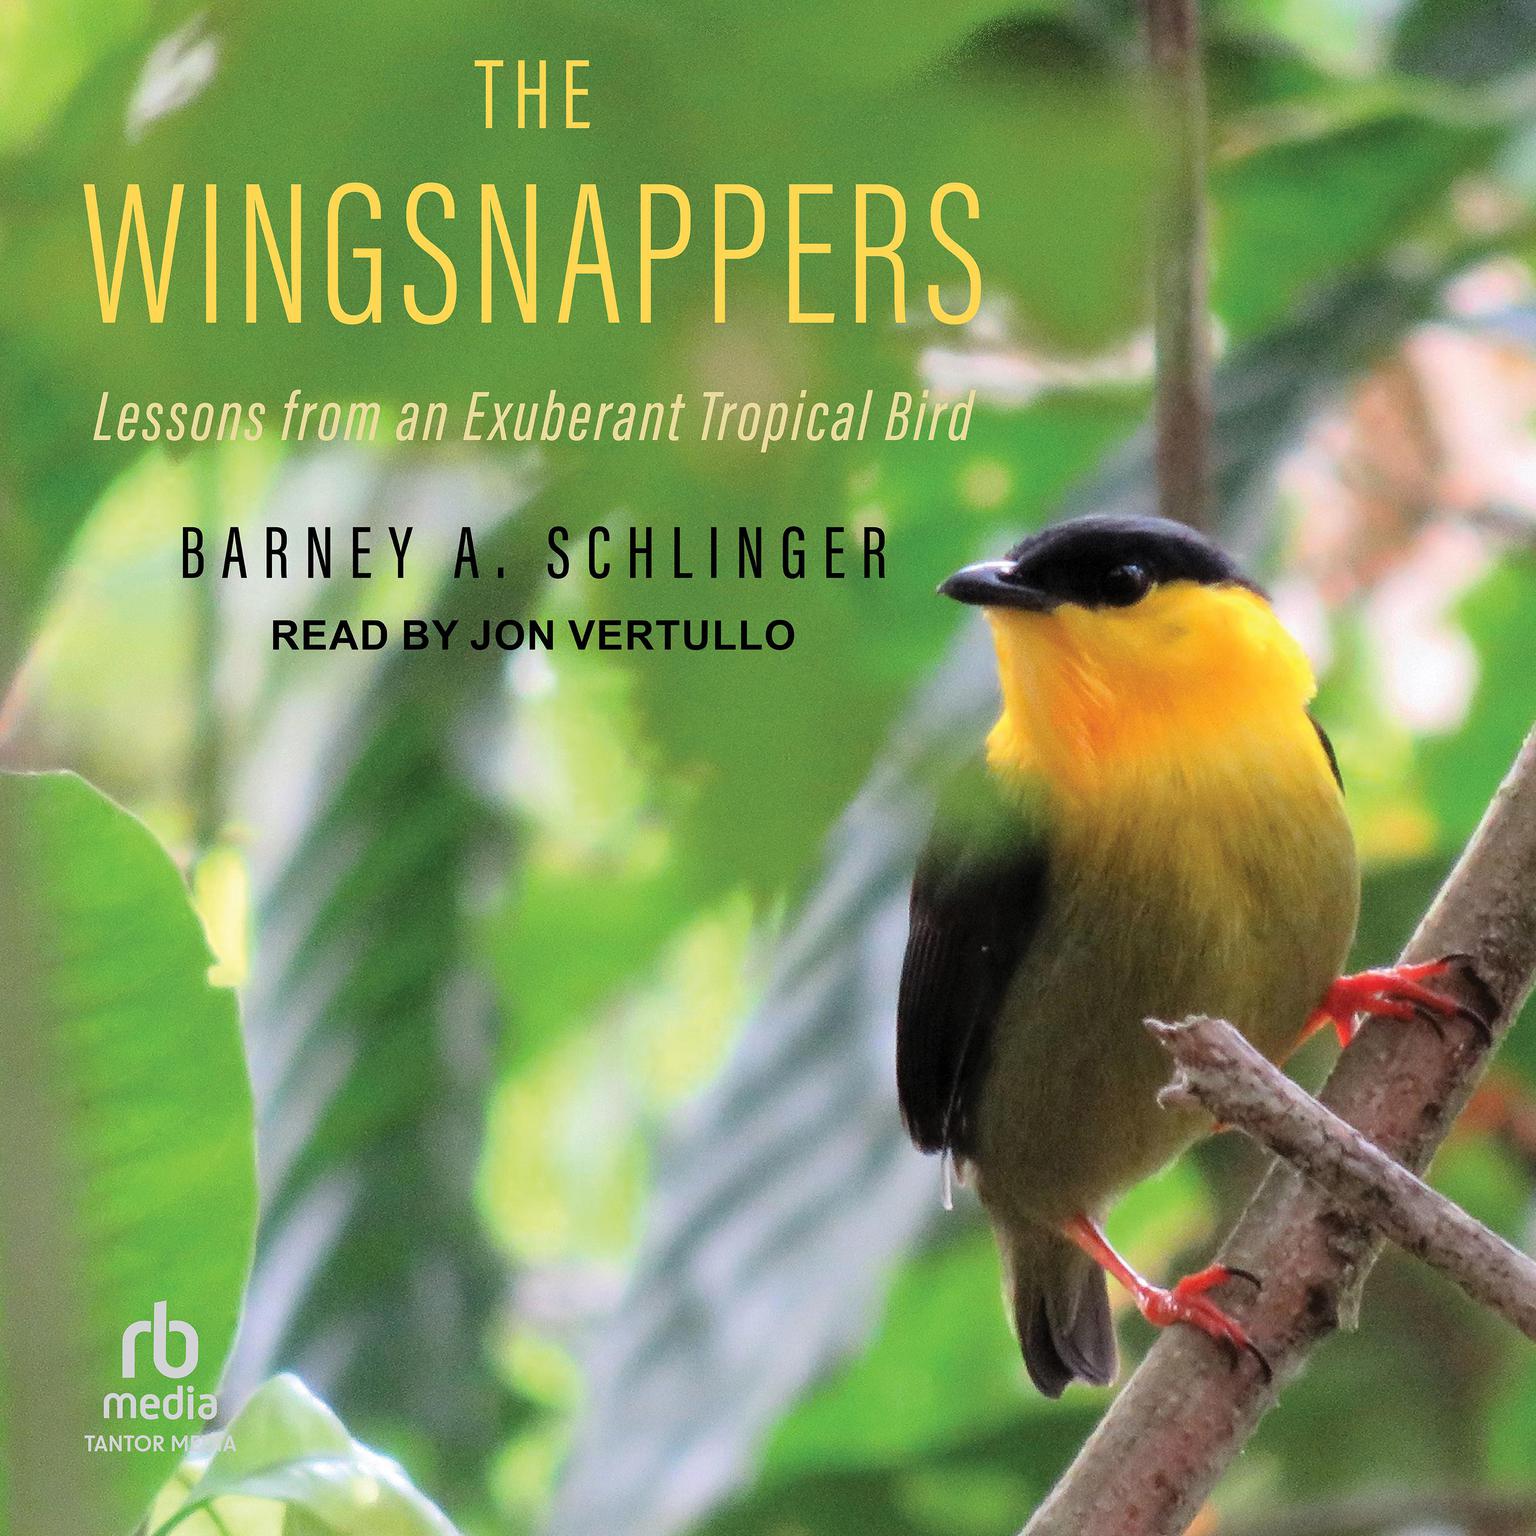 The Wingsnappers: Lessons from an Exuberant Tropical Bird Audiobook, by Barney A. Schlinger